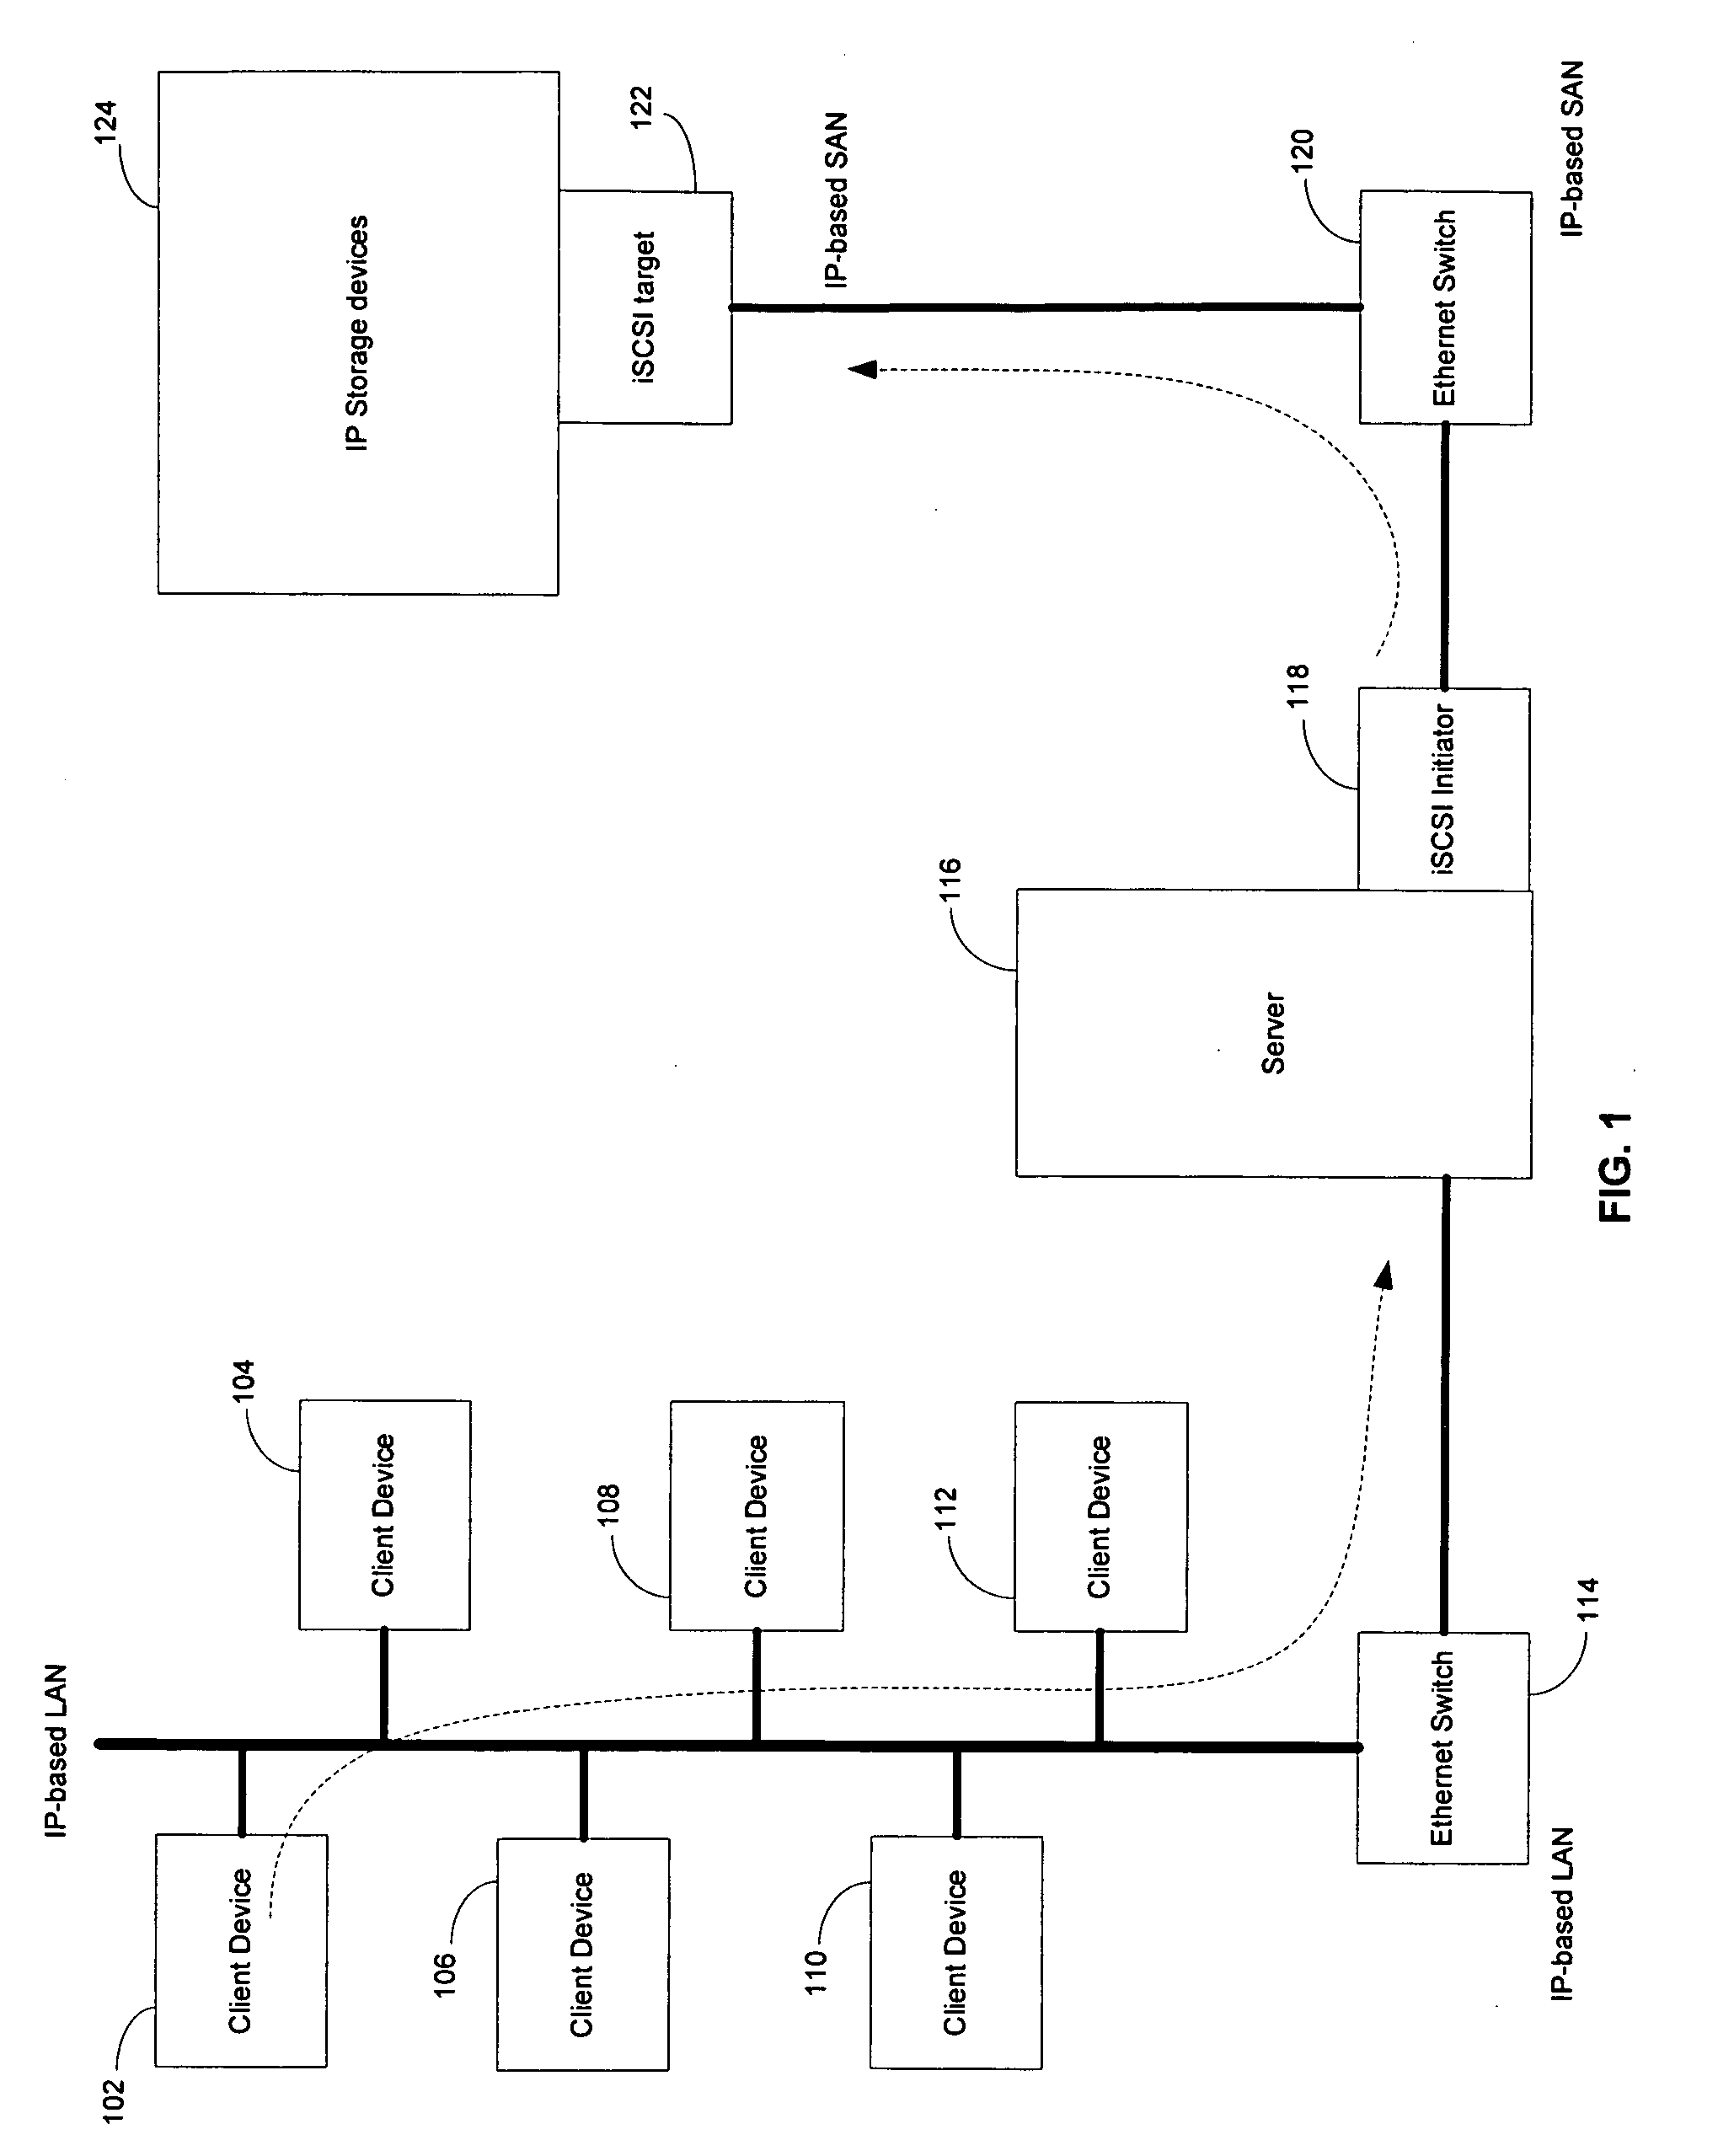 Method and system for supporting read operations with CRC for iSCSI and iSCSI chimney